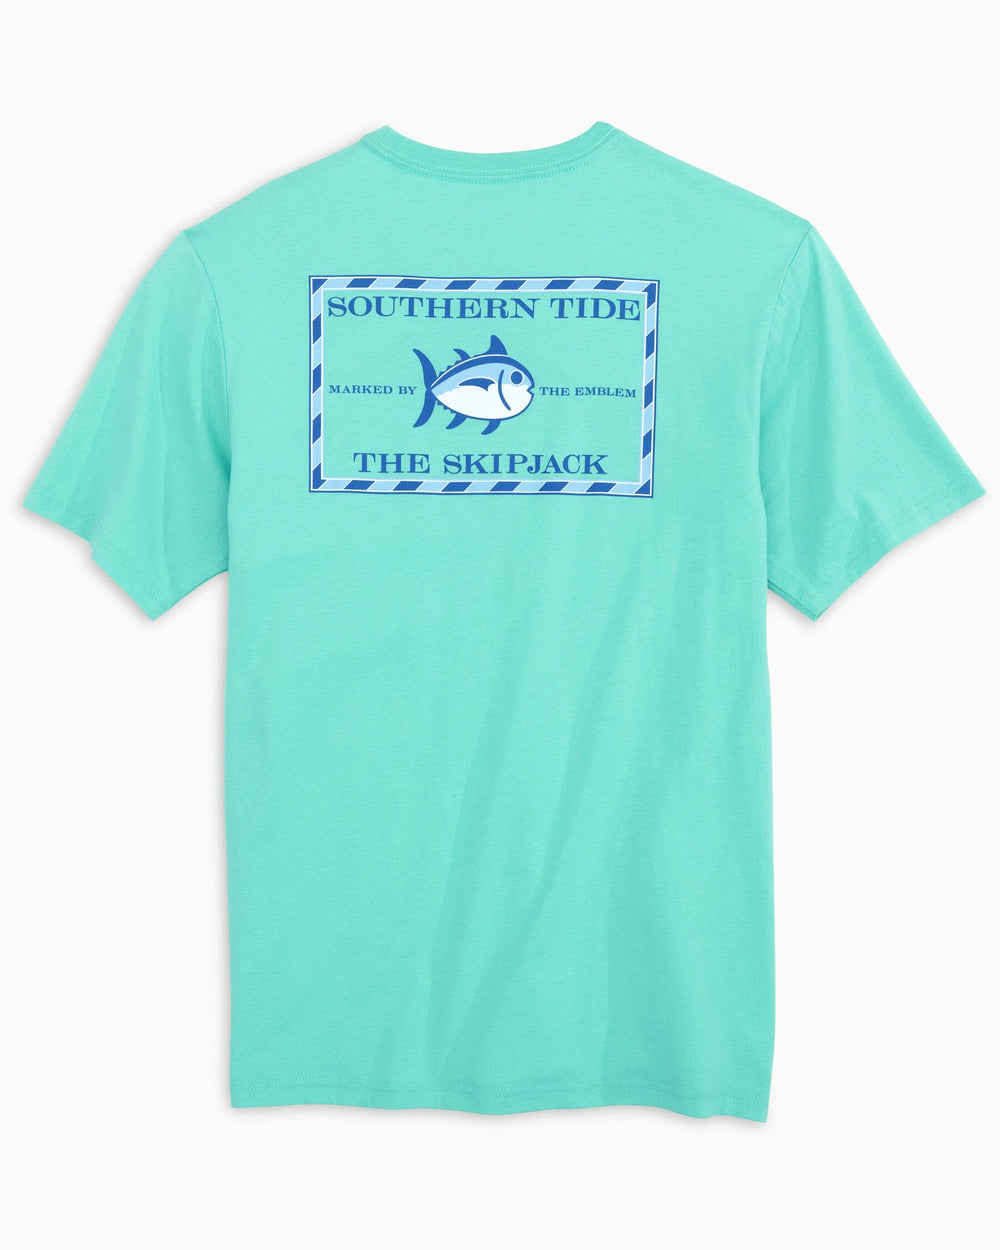 The back view of the Southern Tide Original Skipjack Short Sleeve T-Shirt by Southern Tide - Cool Mint